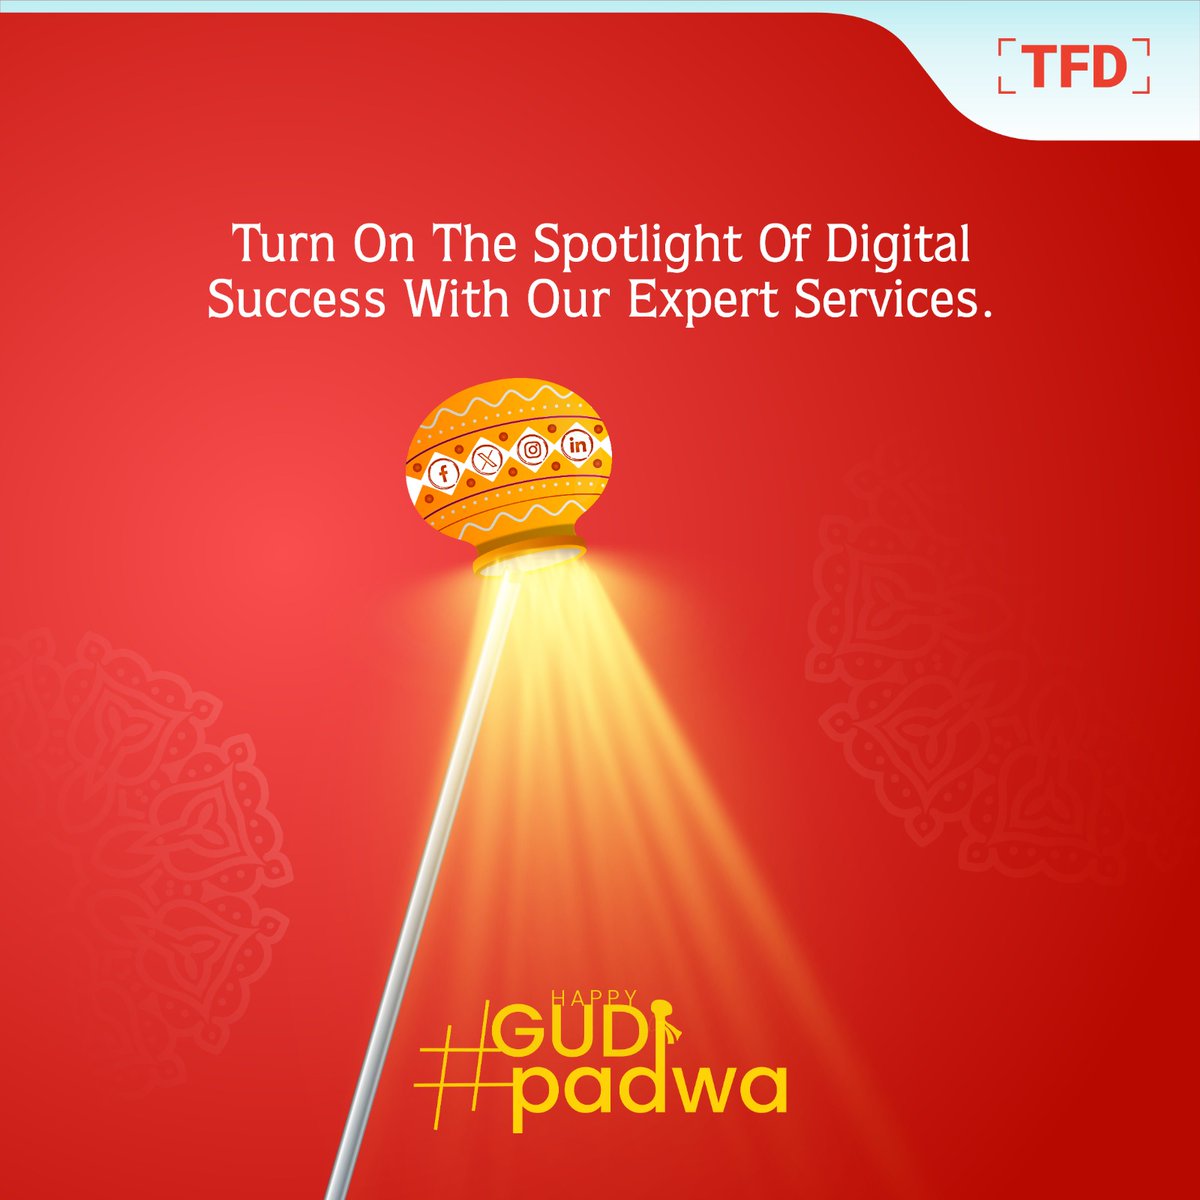 Think First Digital wishes you all a very Happy Gudi Padwa.
This new year, make innovative beginnings and stay ahead in the digital age by getting in touch with us.

#Happygudipadwa #Gudipadwa #NewYear #Maharashtra #Festival #JoyfulBeginnings #TFD #ThinkFirstDigital